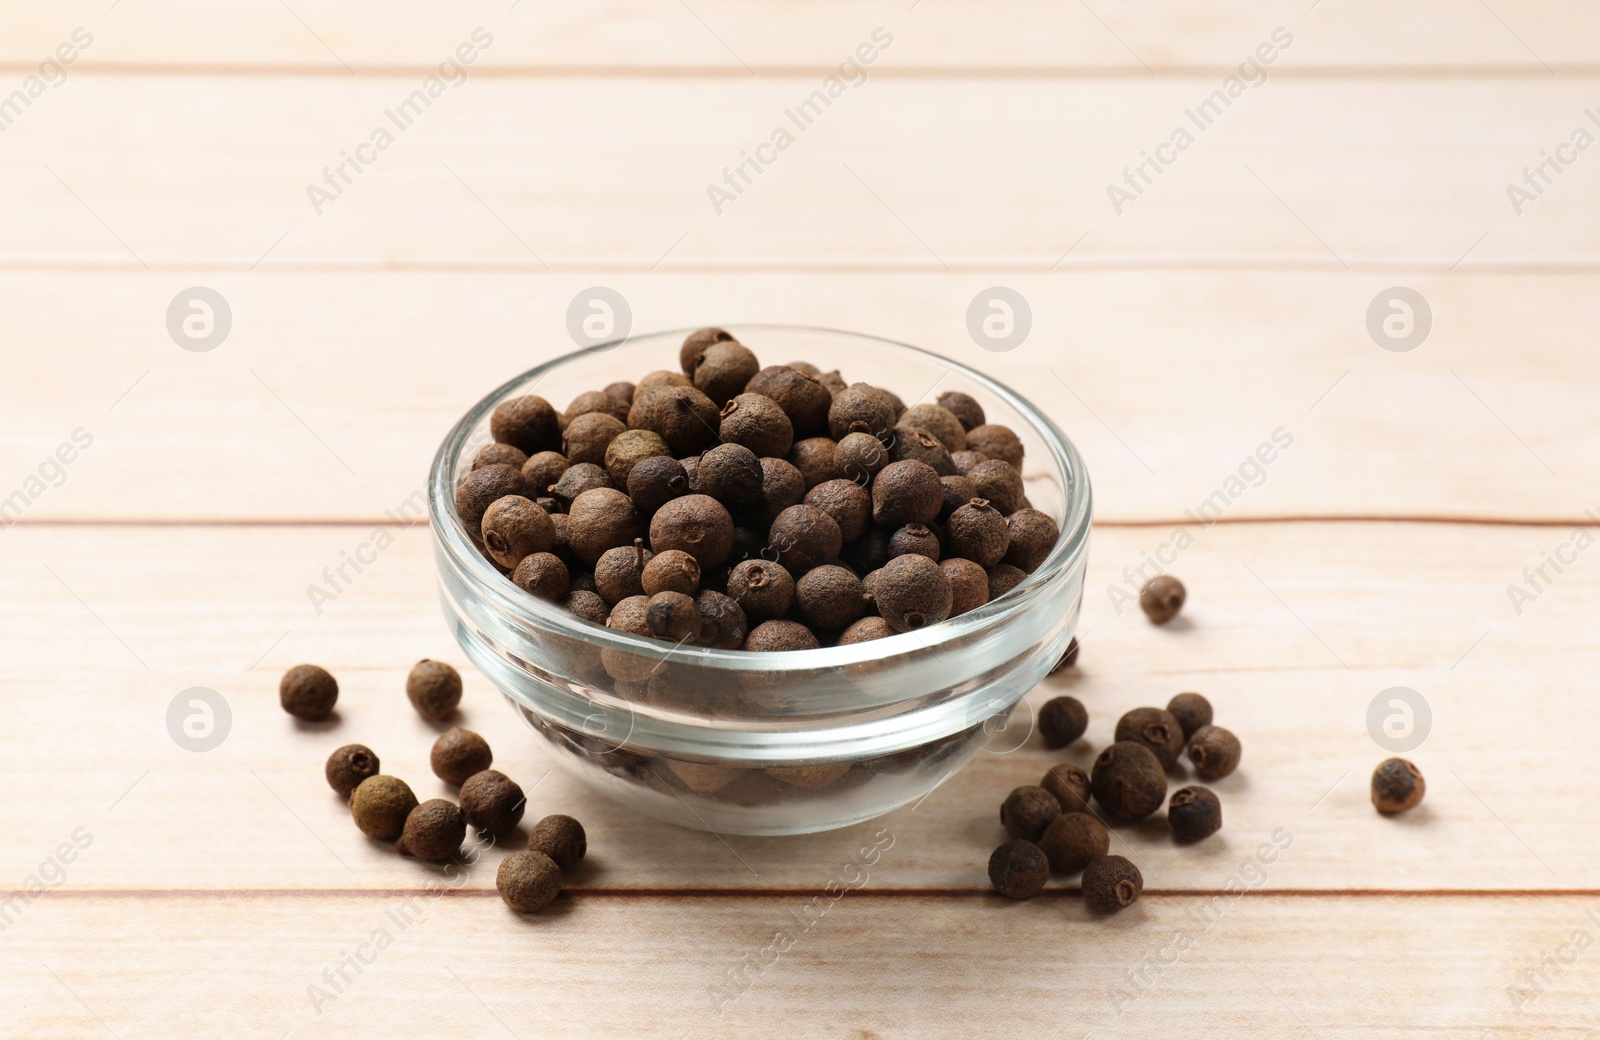 Photo of Dry allspice berries (Jamaica pepper) in bowl on light wooden table